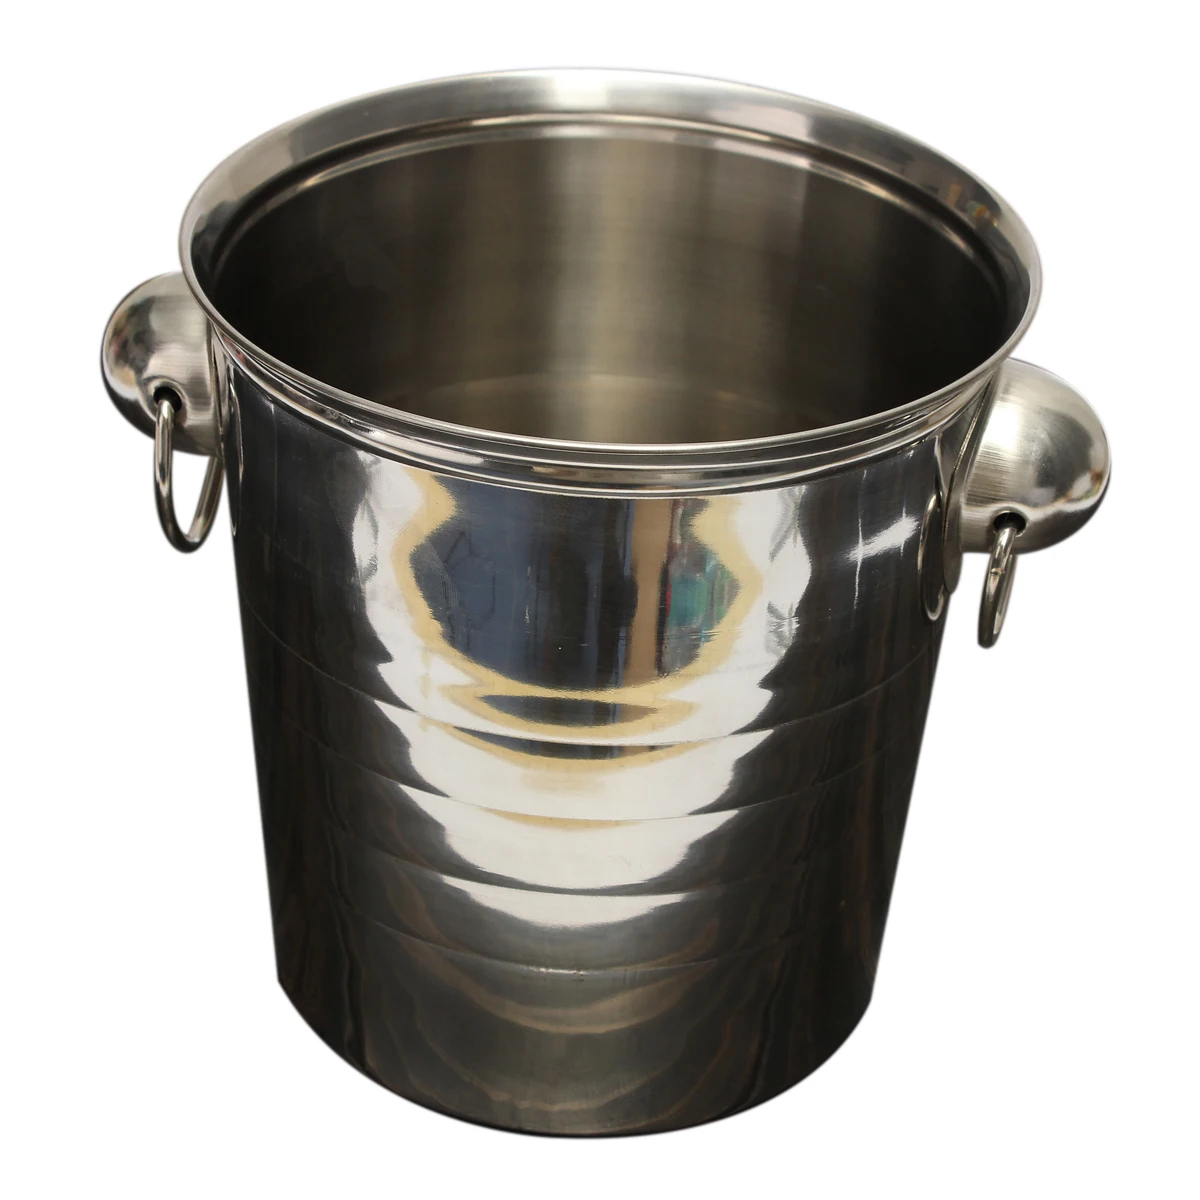 Image HGHO Silver Stainless Steel Ice Punch Bucket Wine Beer Cooler Champagne Cooler Party